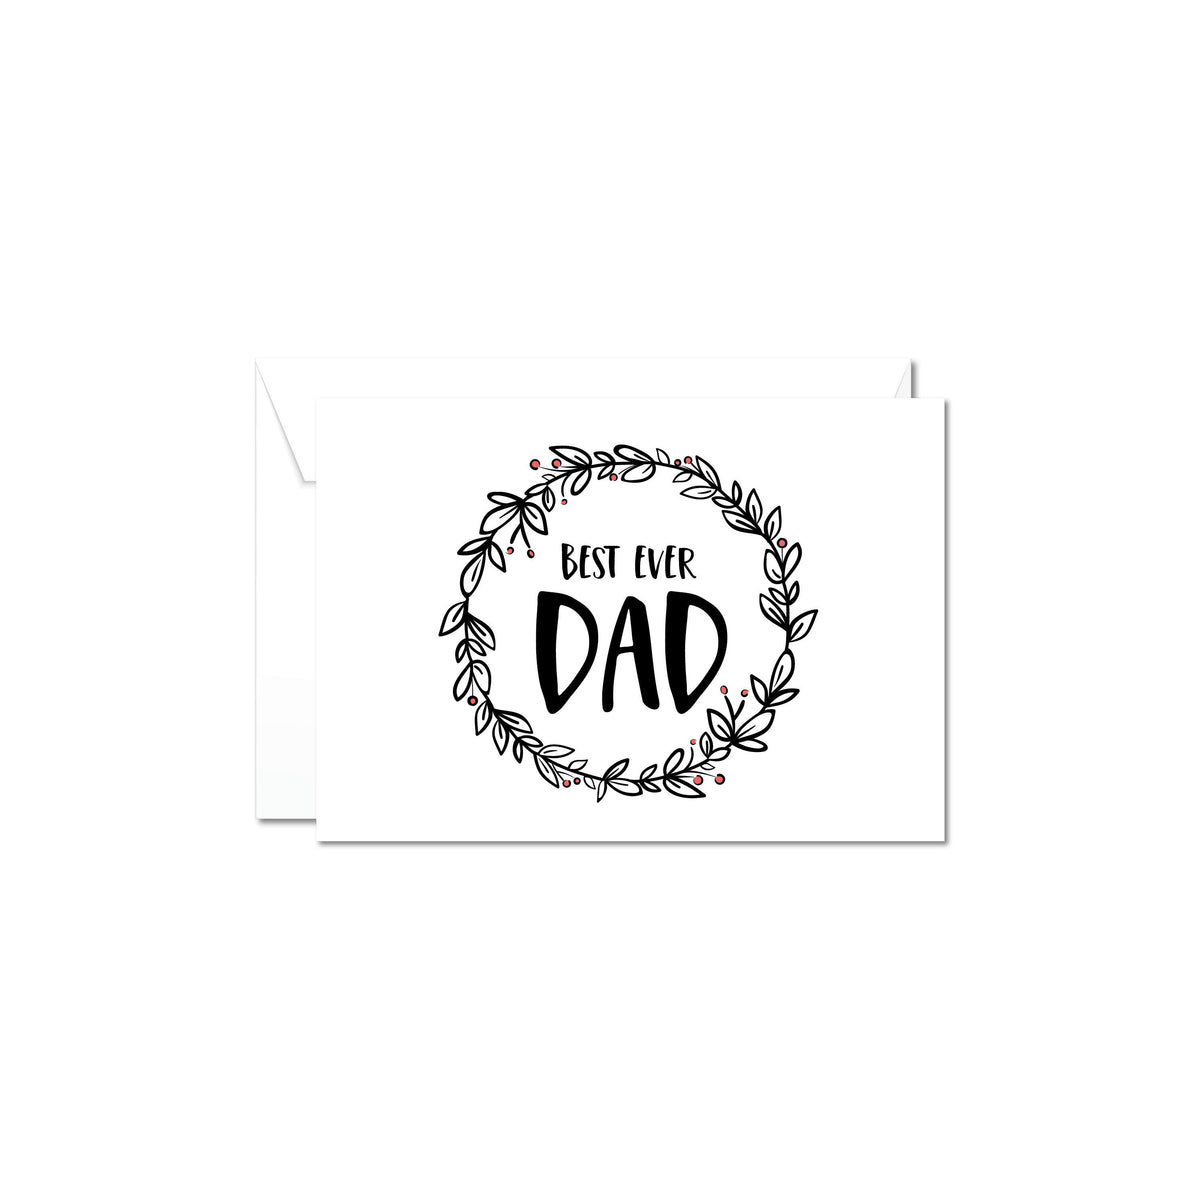 Boxsmith NZ Gift boxes & NZ gift hampers for Fathers Day - this monochrome Fathers Day gift card is the perfect accompaniment to your gift for him. Easy delivery NZ wide of our online gifts for him